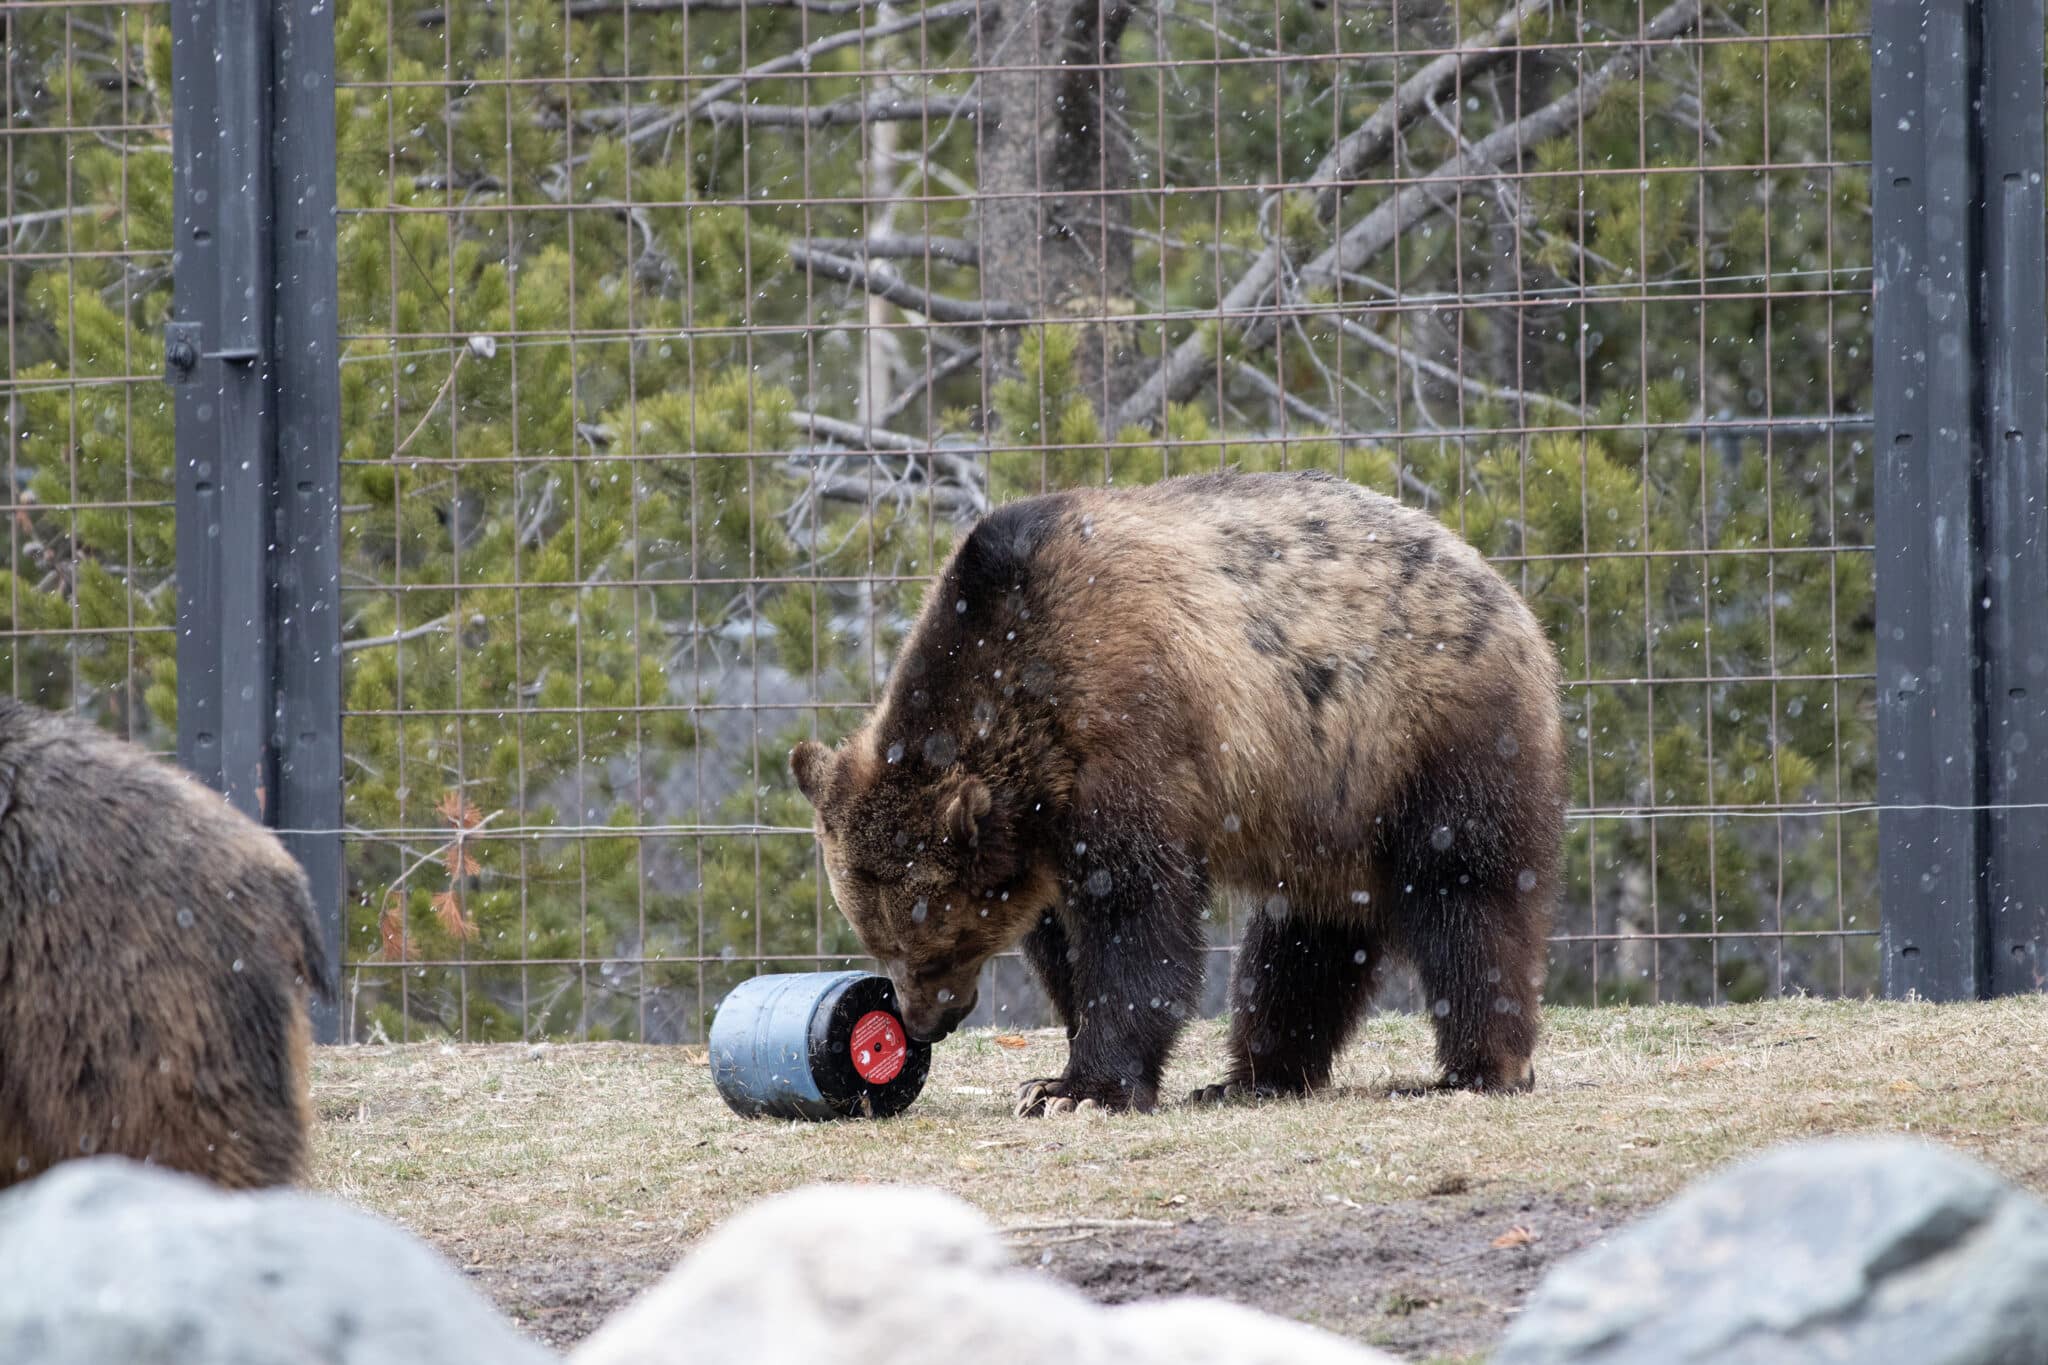 Grizzly bear tests a BearVault bear canister.